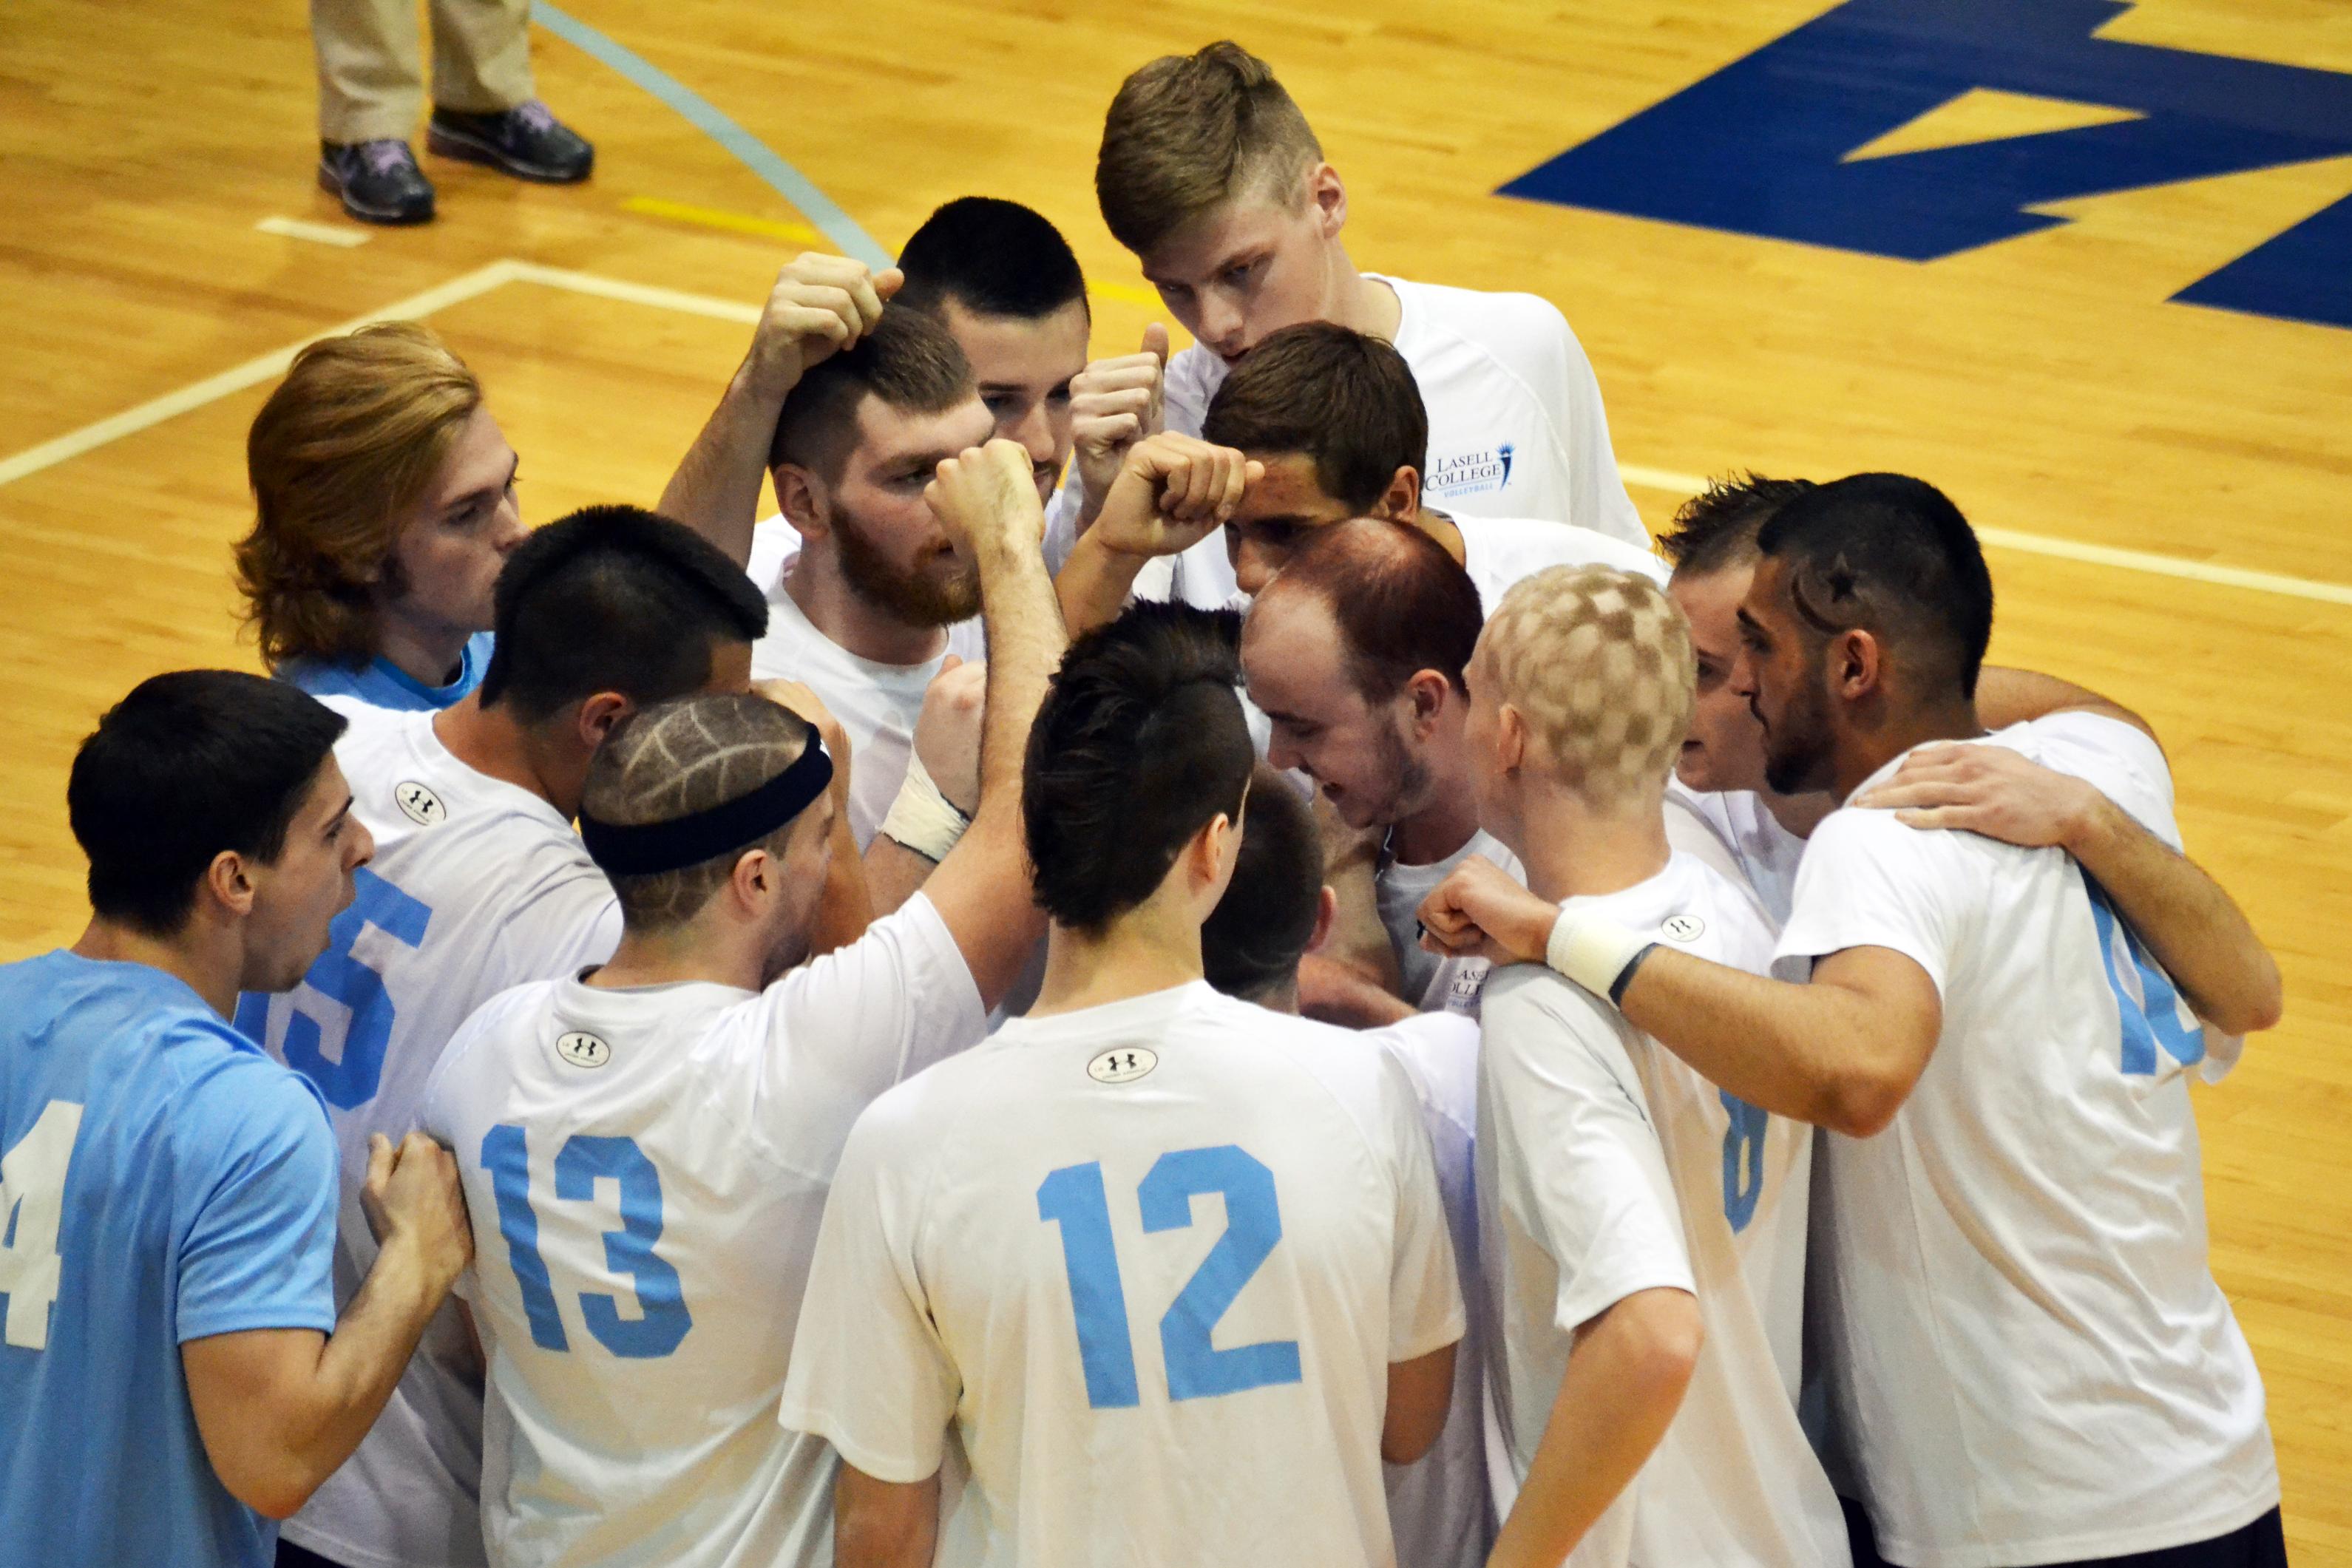 Men's Volleyball Tripped by Wentworth in GNAC Match